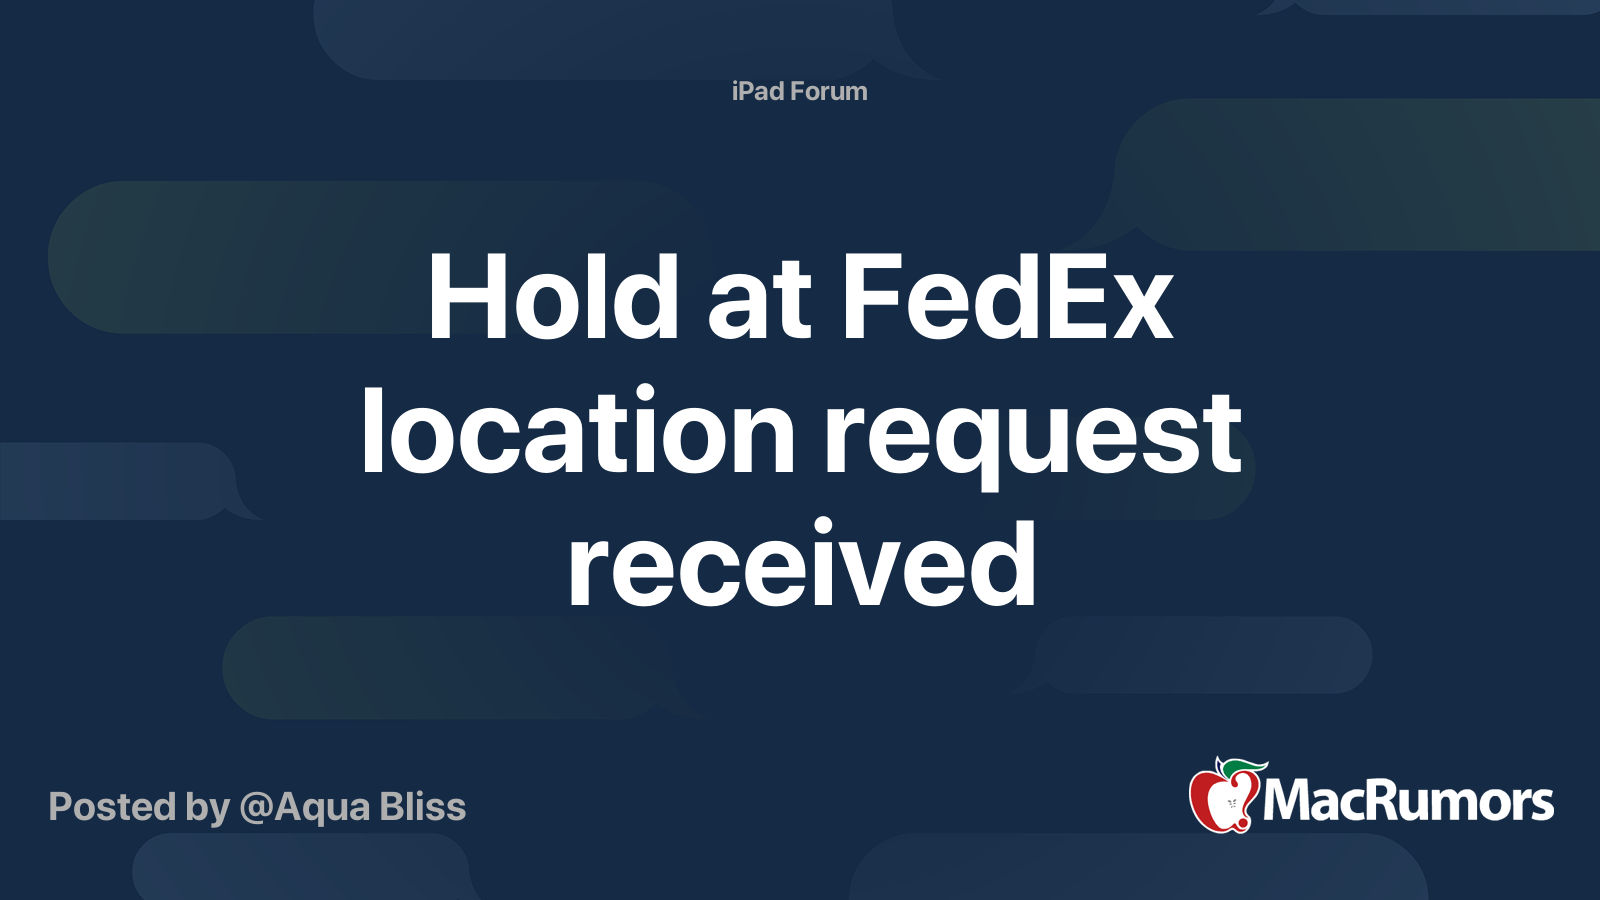 Hold at FedEx location request received